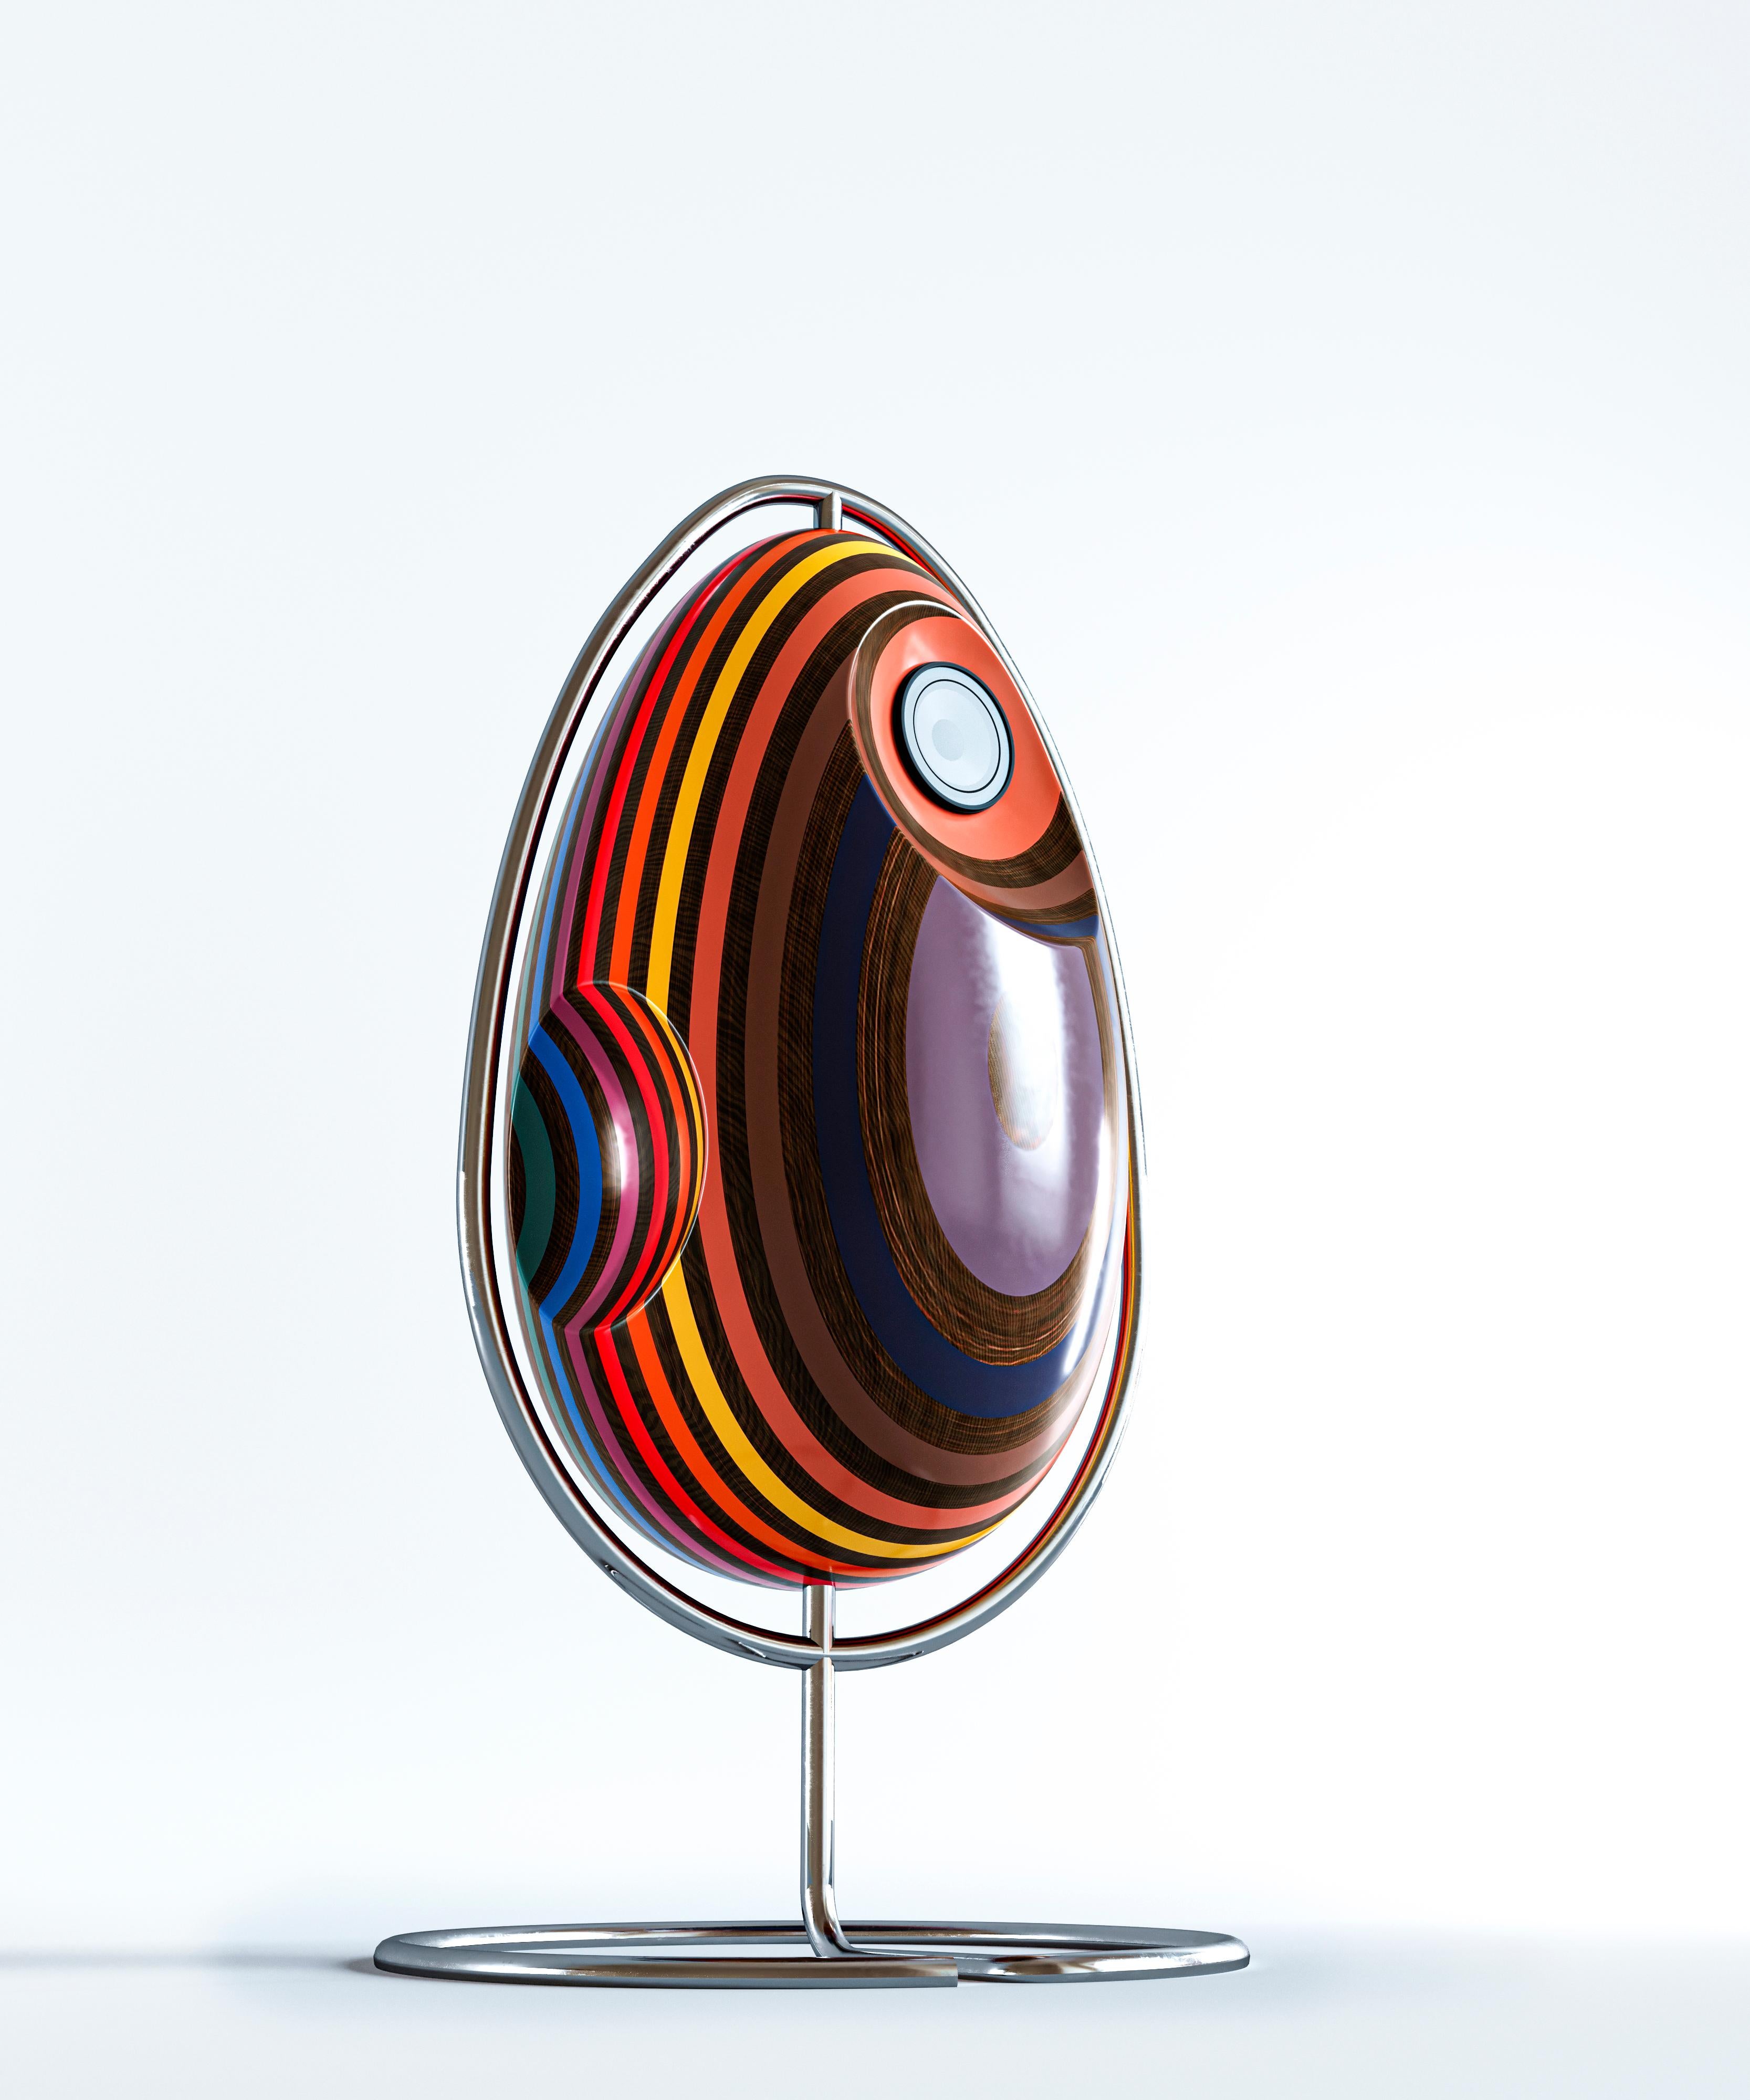 It is an extraordinary spherical cabinet that resembles an alien egg and a space object from a sci-fi movie of the early space exploration era. The futuristic nature of the item is emphasized by color juxtaposition and an interplay of the surface